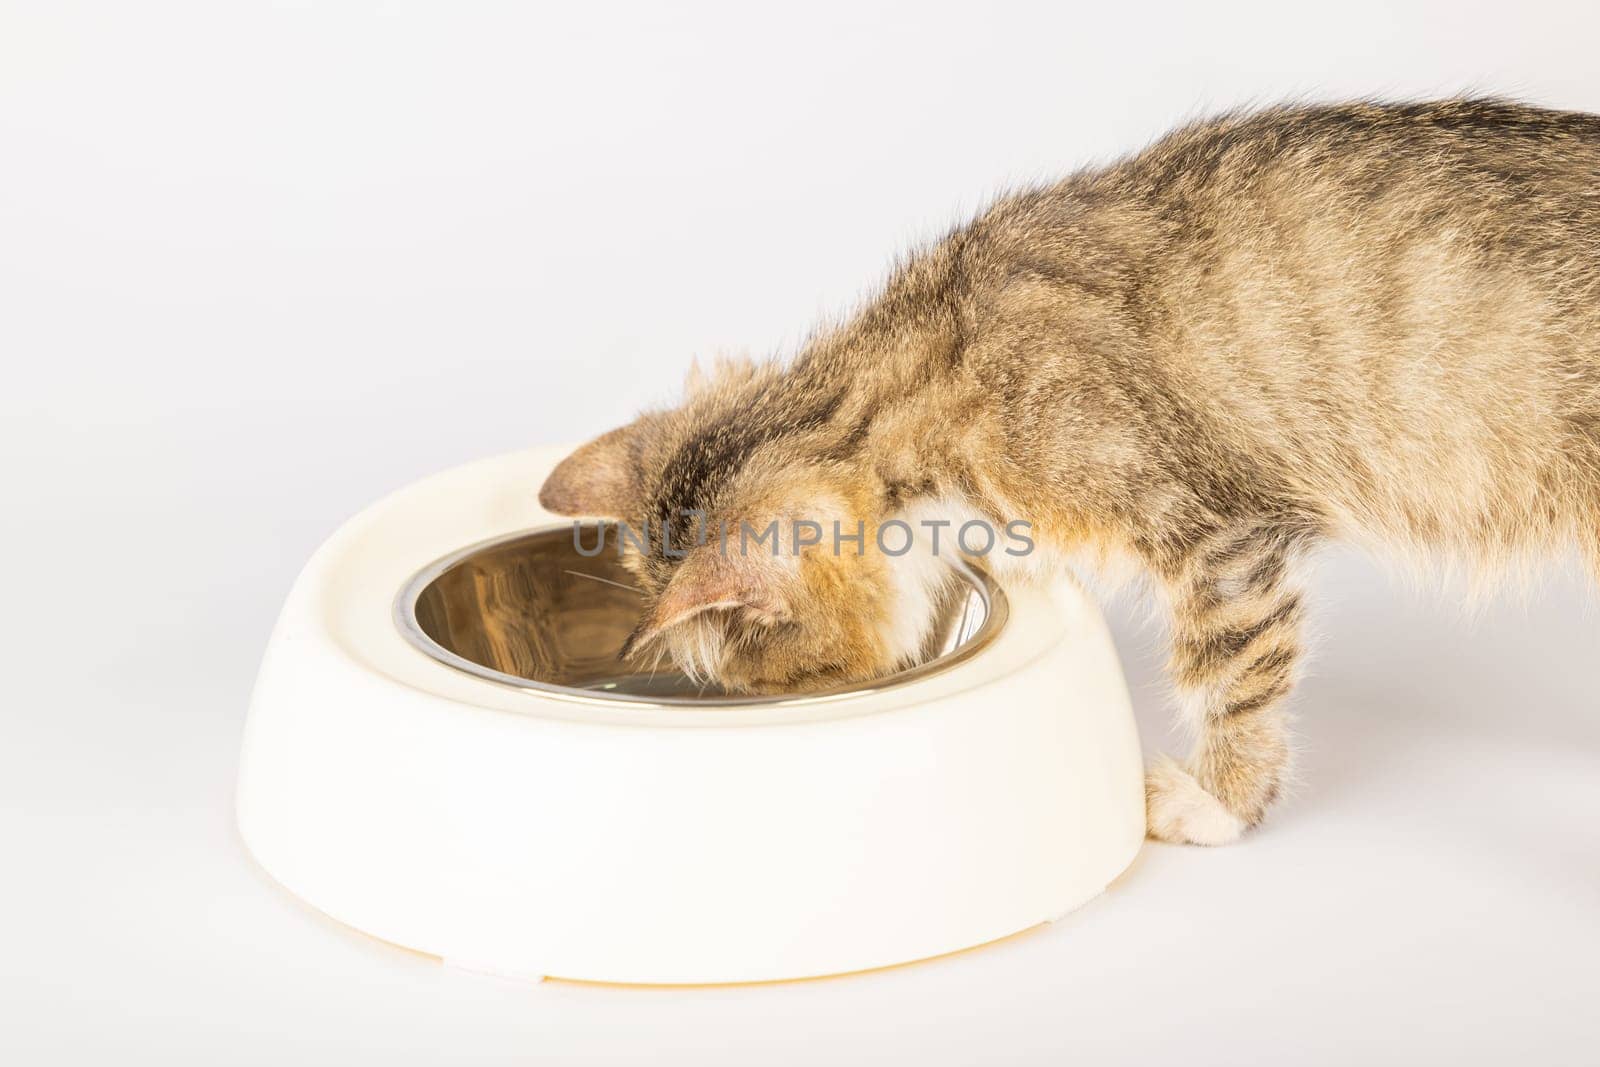 An isolated beautiful tabby cat is sitting next to a food bowl on the floor eating from a heap of food. Its curious eye and small tongue add to the charming portrait of this hungry kitten.